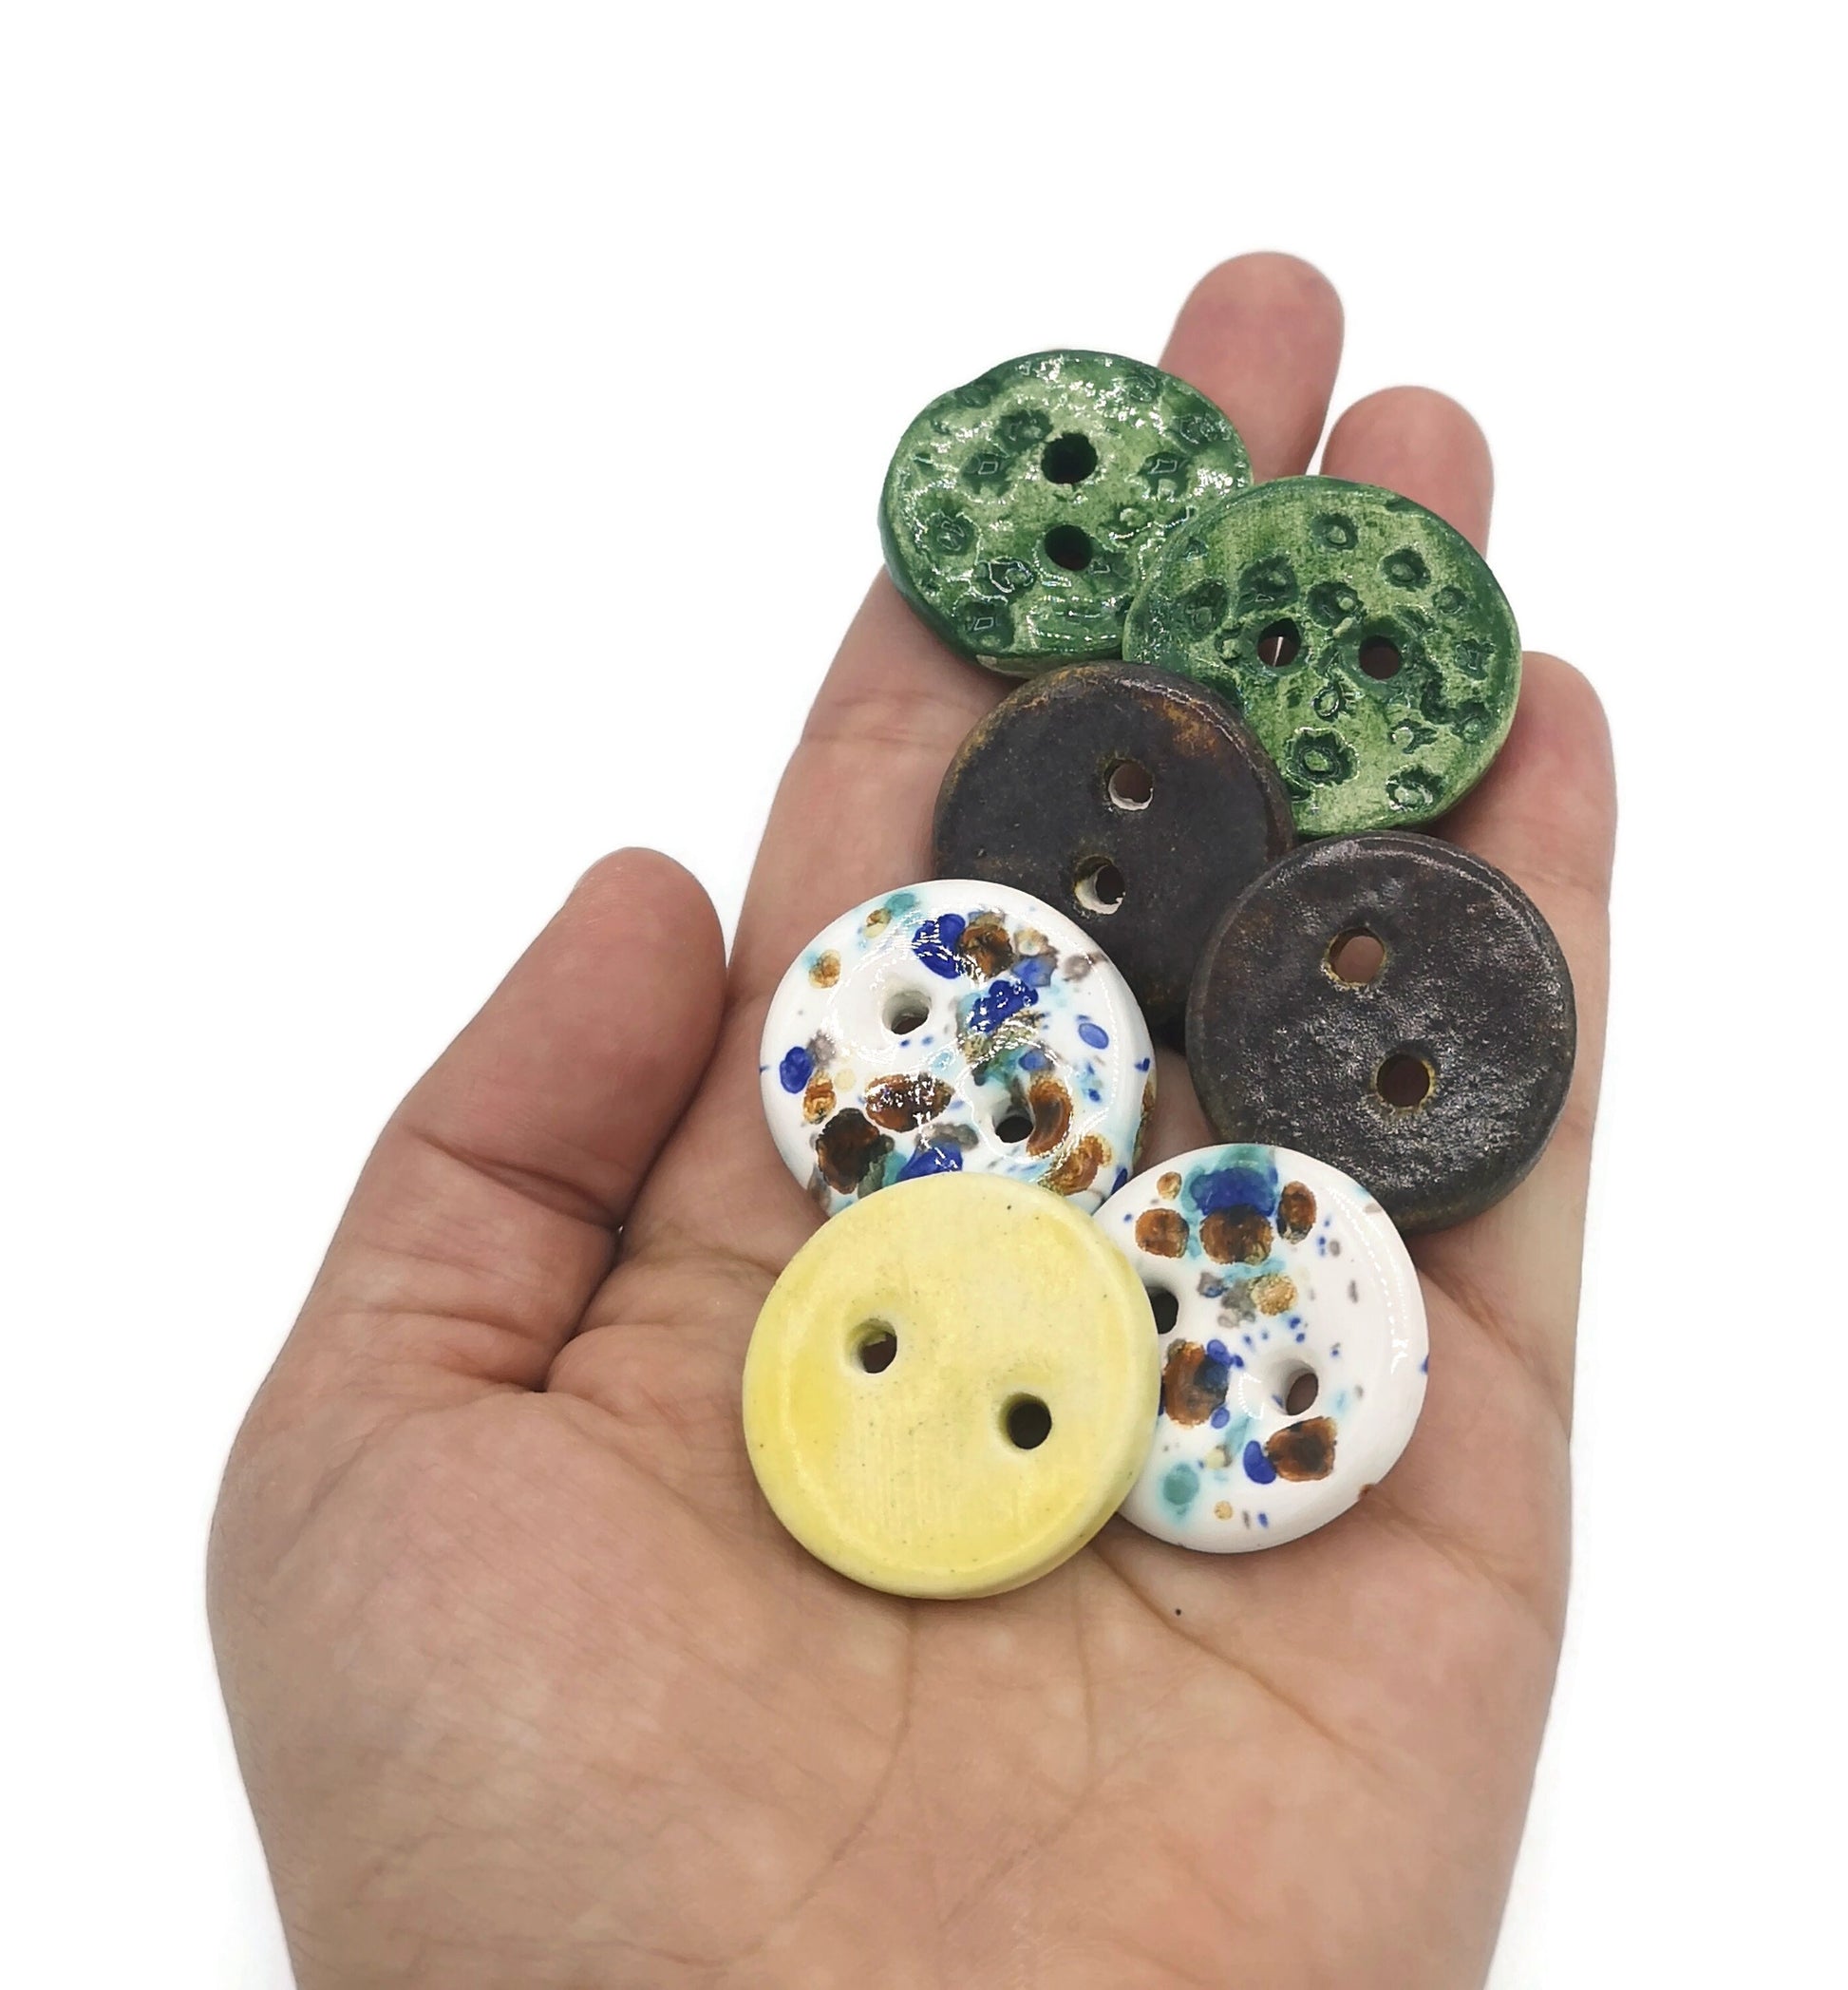 7Pc 30mm Round Buttons Set, Coat buttons, Handmade Ceramic Clothing Finishes Sewing Buttons Lot, Unusual Clay Buttons Hand Painted - Ceramica Ana Rafael